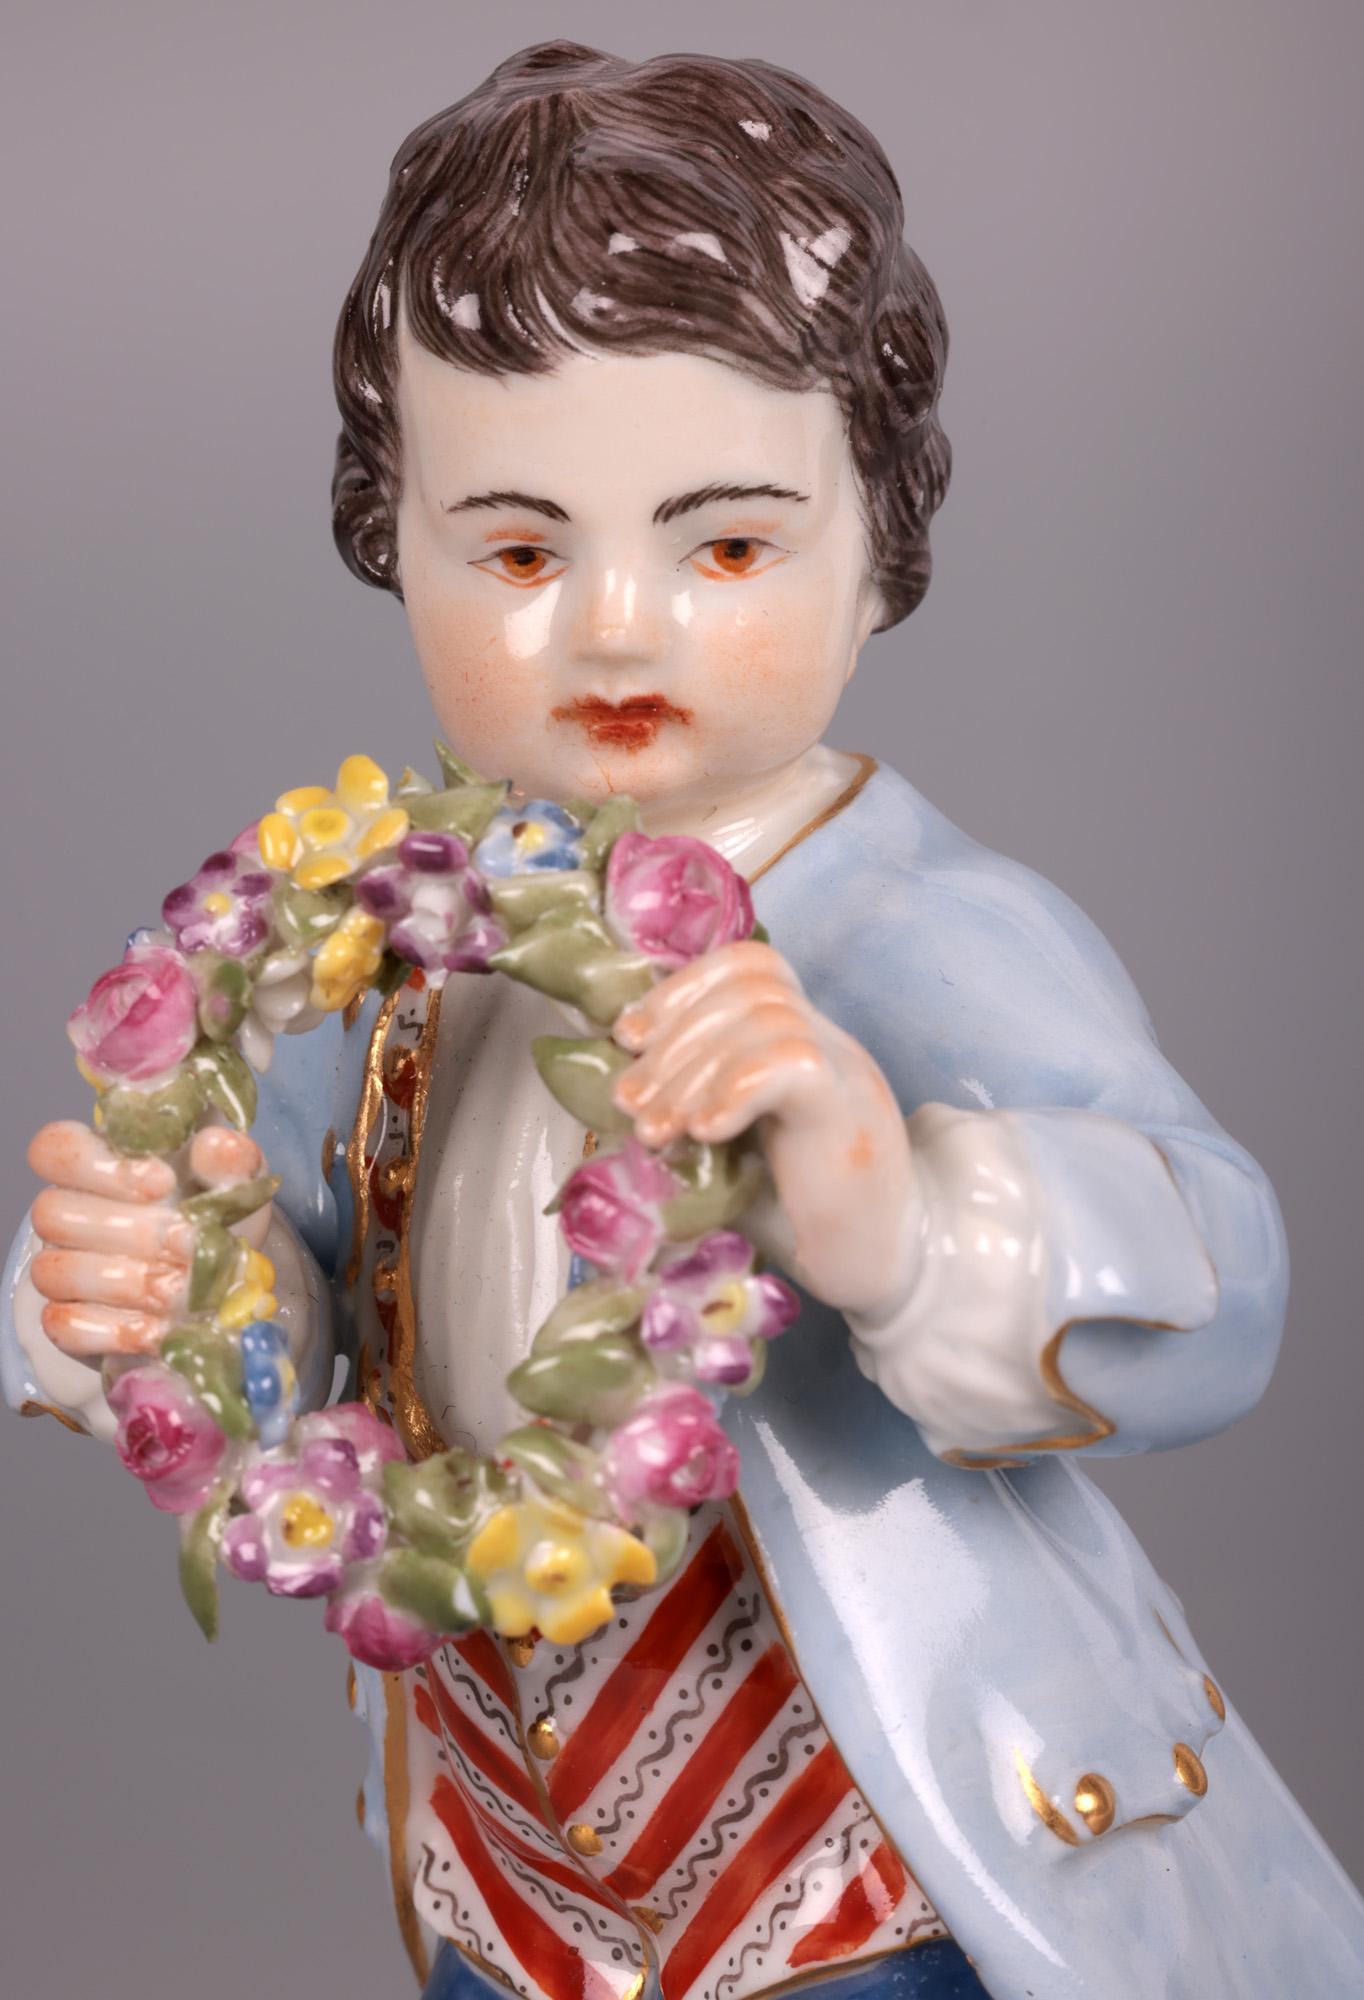 A fine matched pair vintage German porcelain figures holding flowers made by world renowned makers Meissen and believed to date from the early 20th century. This finely made pair of figures are of typical Meissen style portraying a young girl both